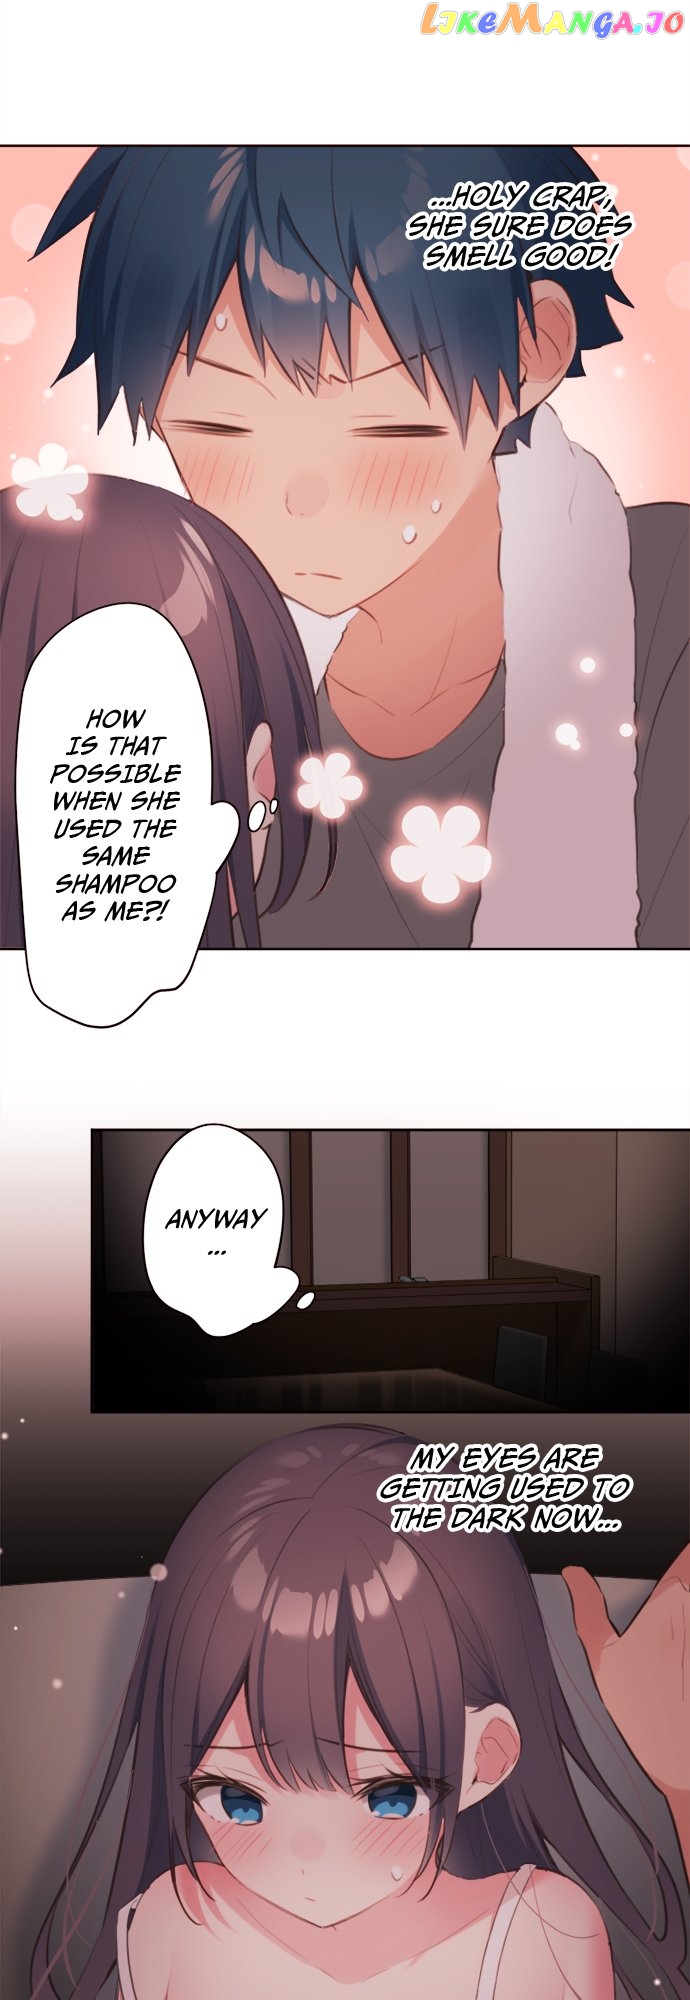 A Hidden Side to My Crush - chapter 70 - #6